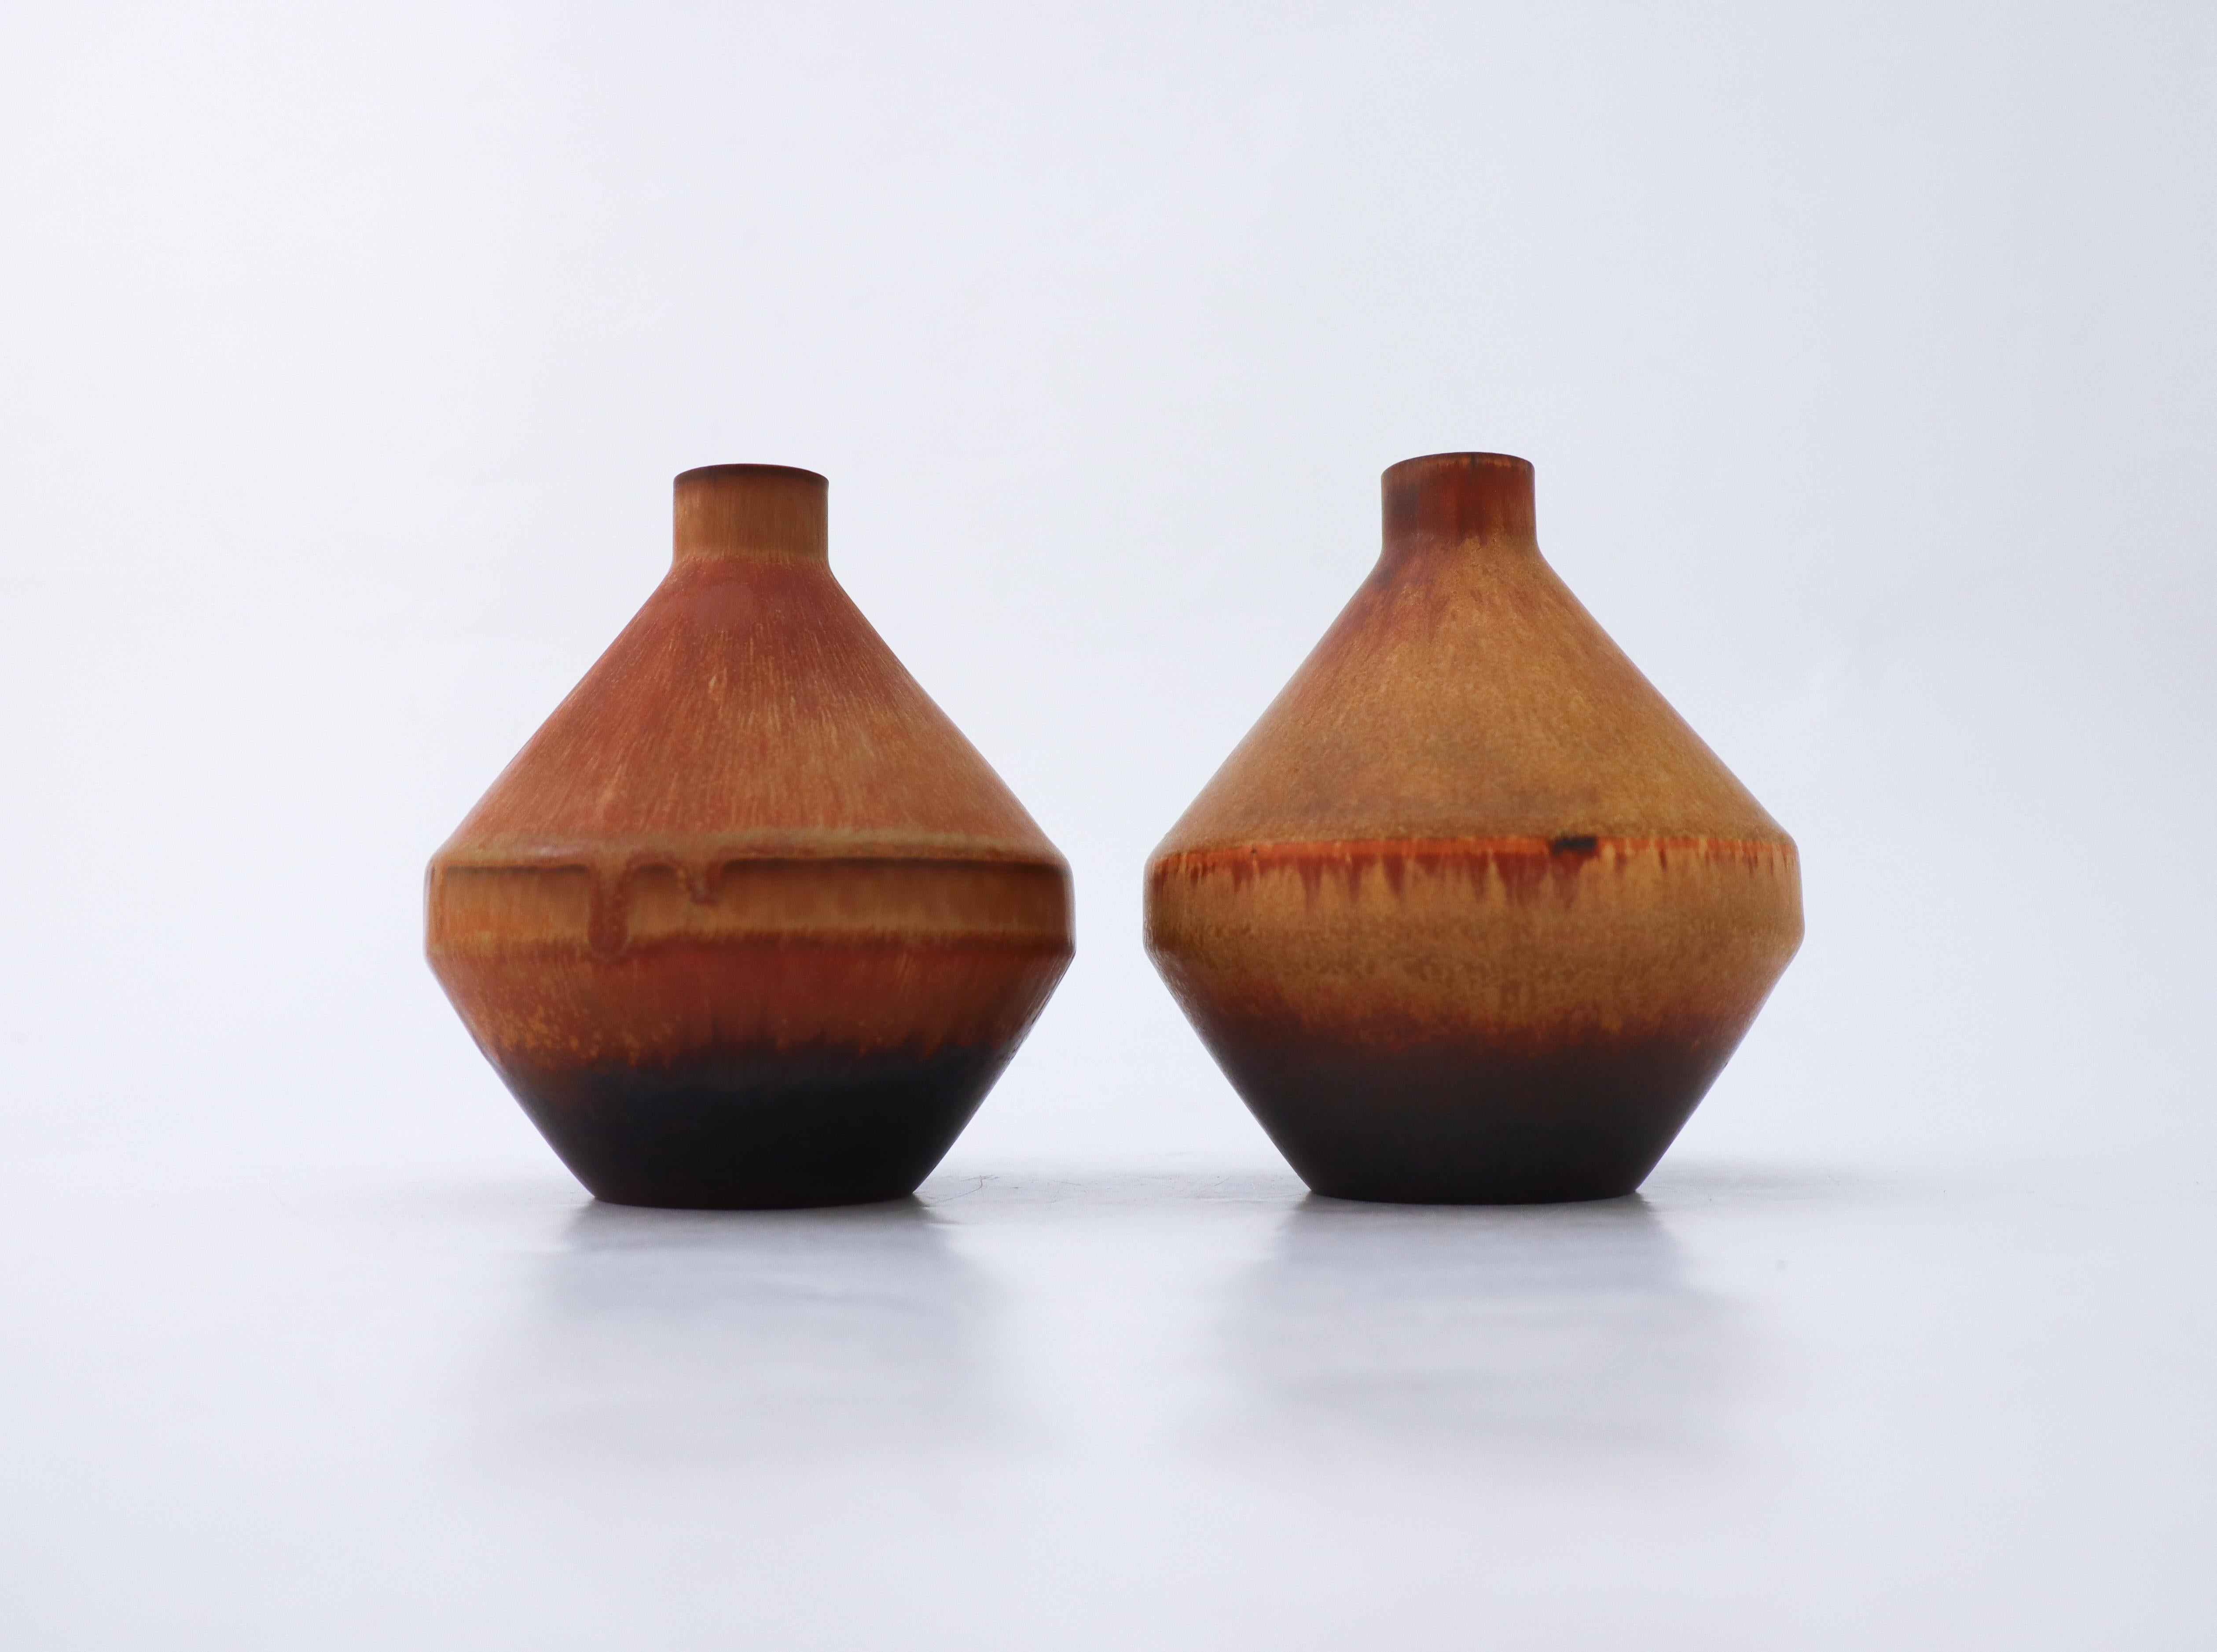 A pair of lovely brown vases designed by Carl-Harry Stålhane in the Mid 20th Century at Rörstrand. The vases are 11 cm (4.4